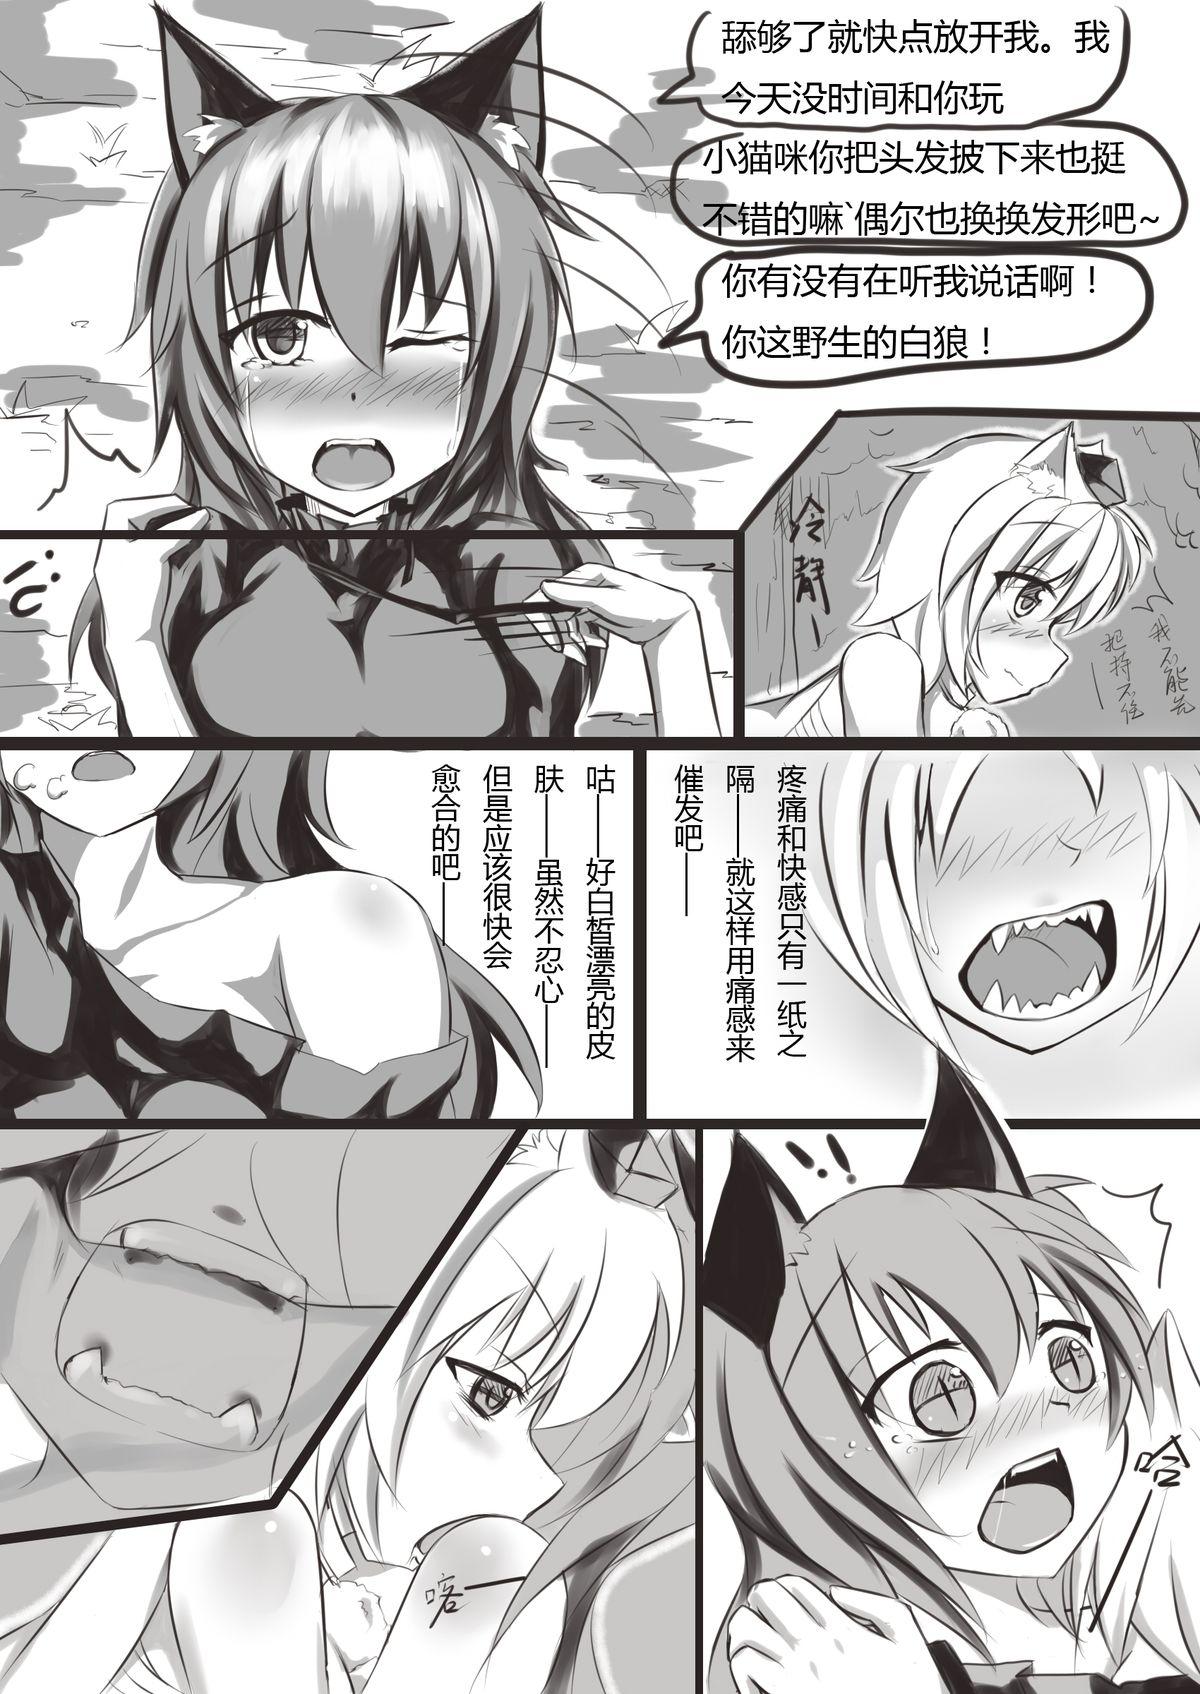 Hot Mom 白狼黑猫 - Touhou project Alt - Page 5